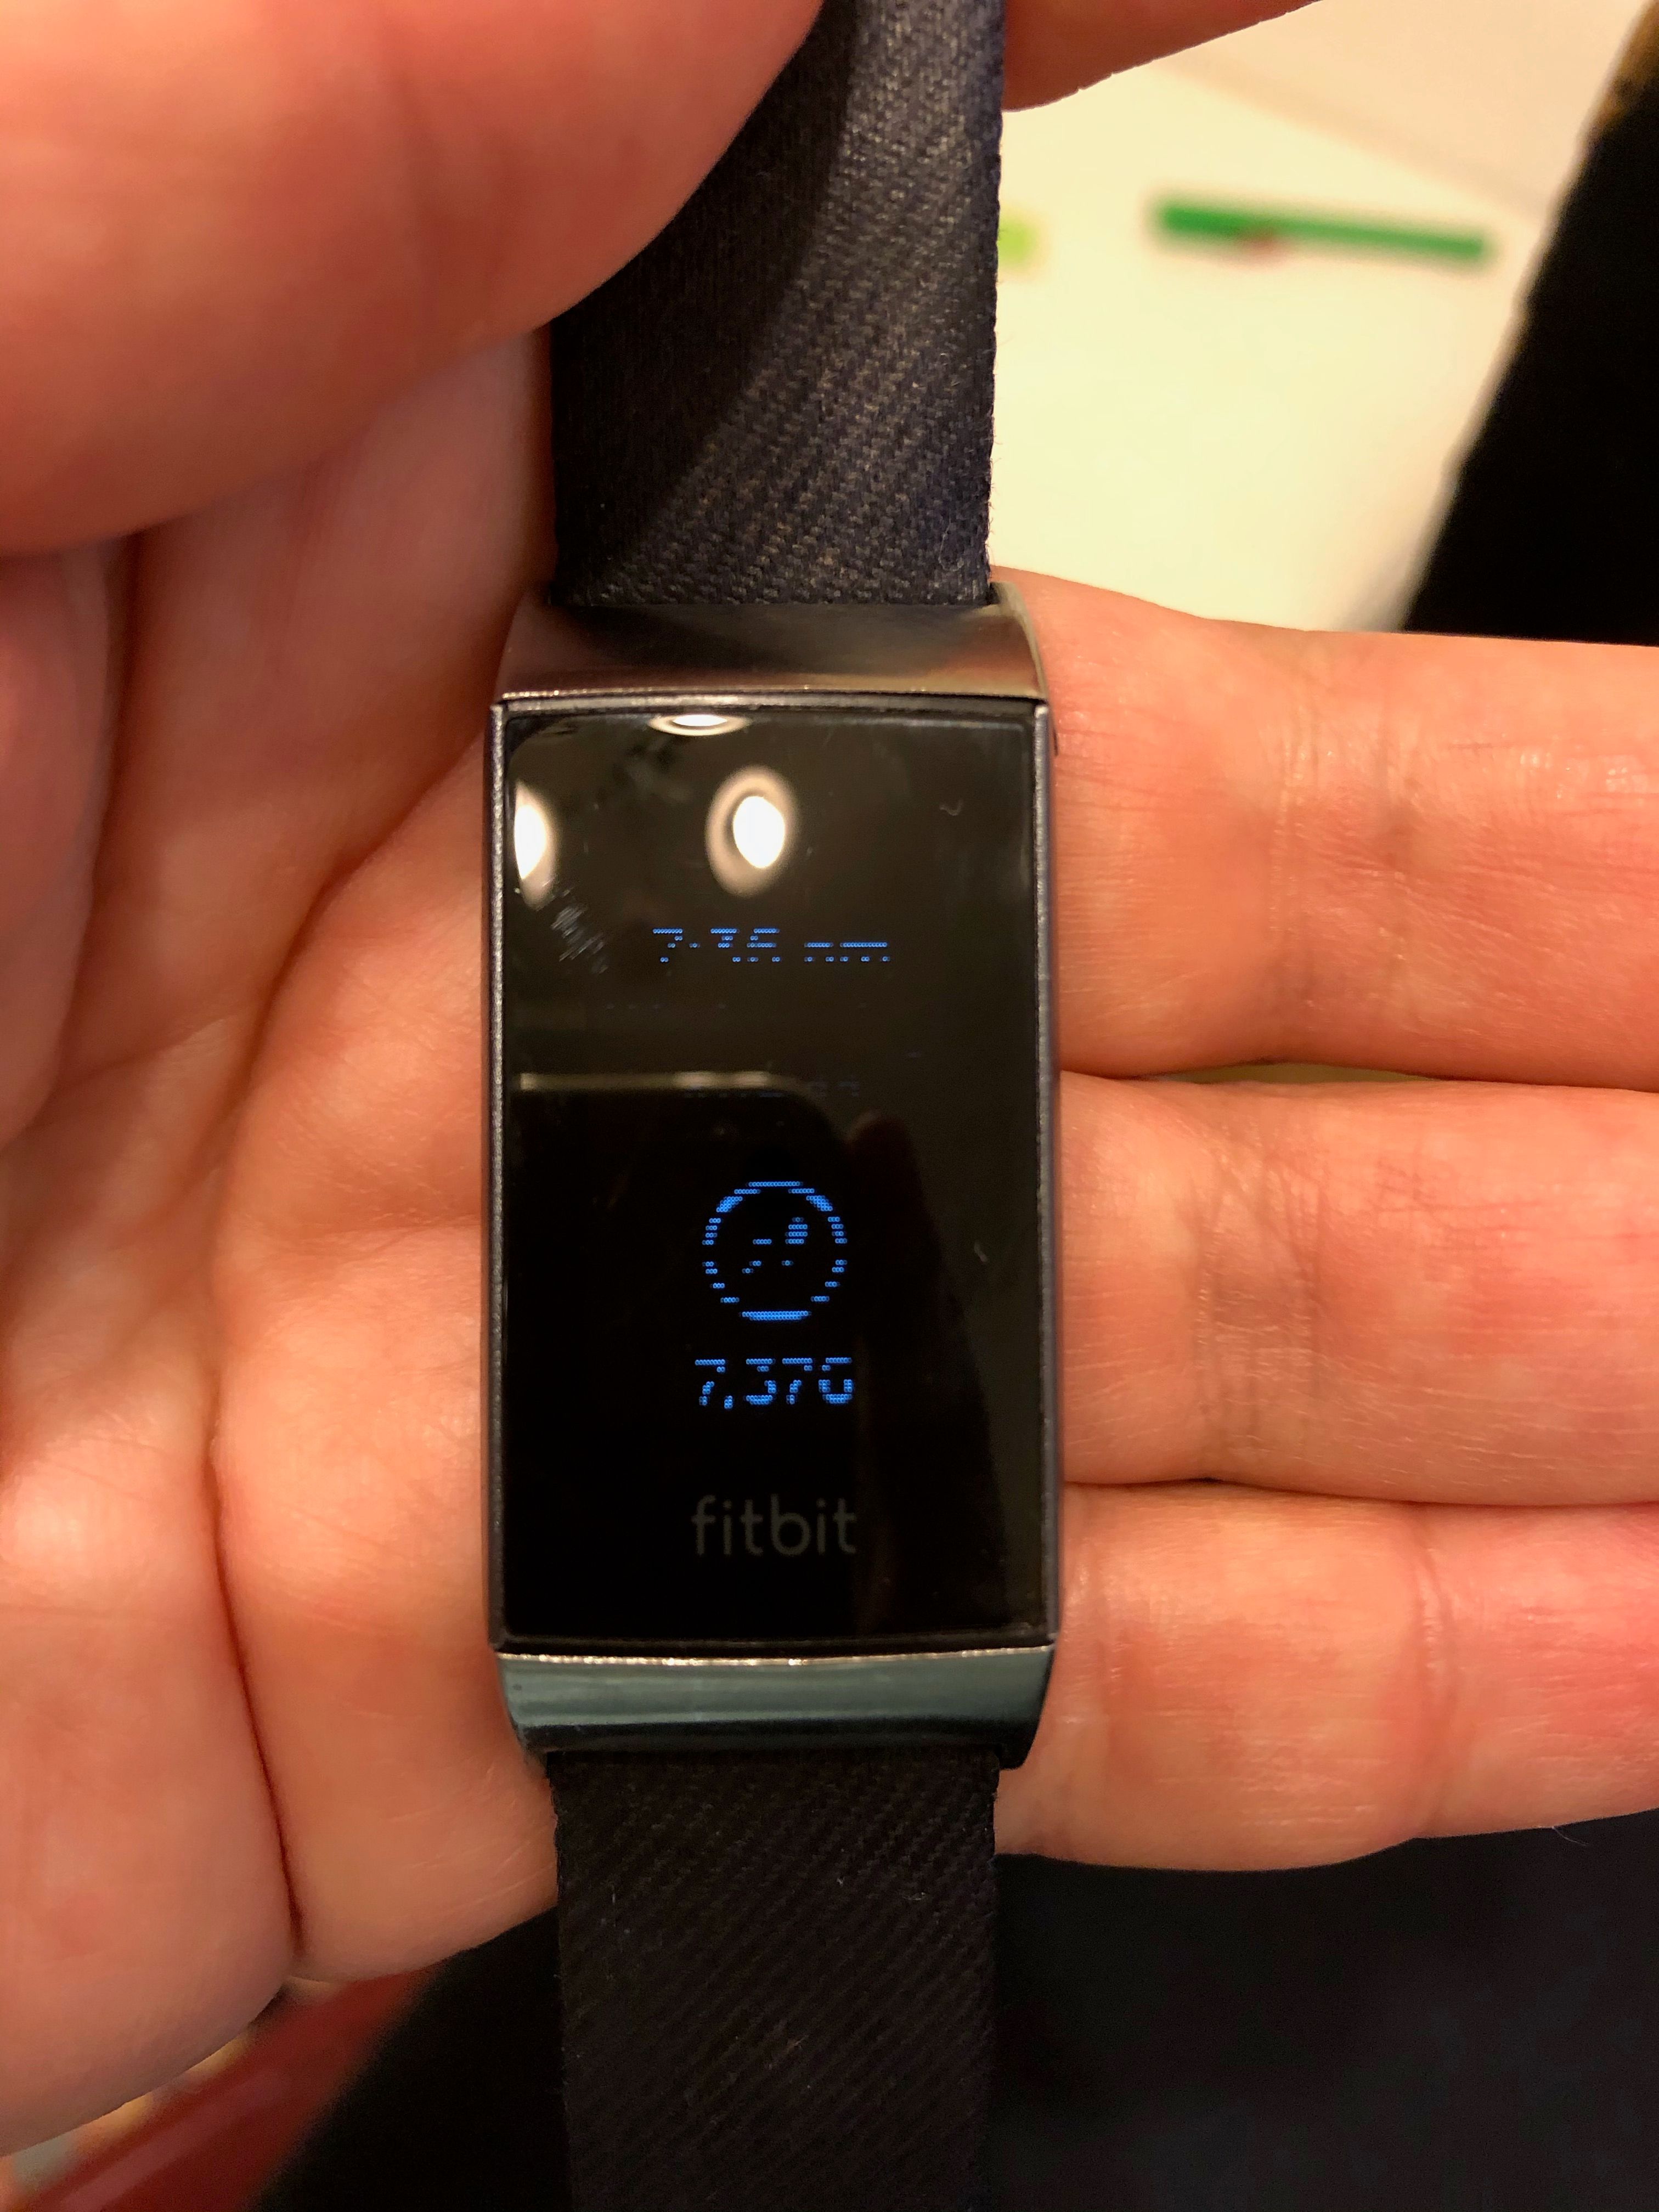 Solved: Charge pixels on the screen - Page 2 Fitbit